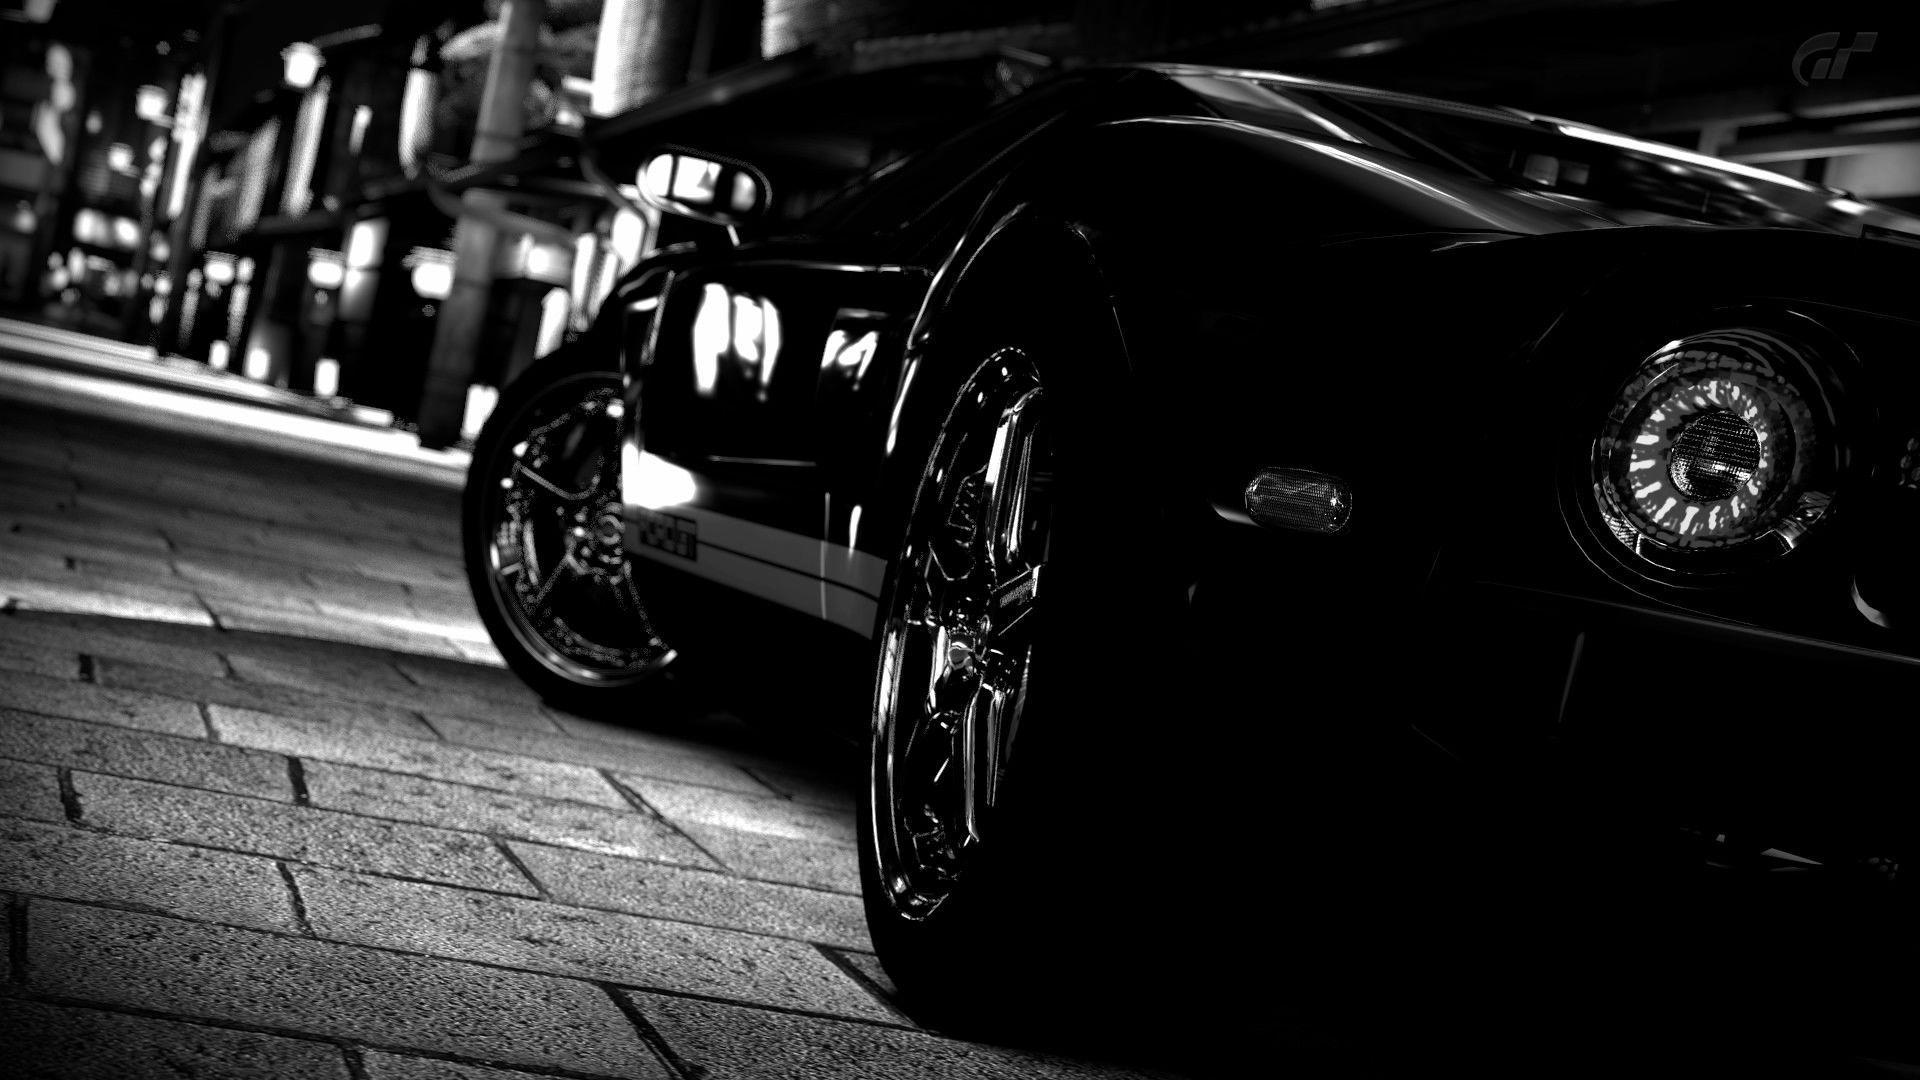 Black and White Car Wallpaper Free Black and White Car Background